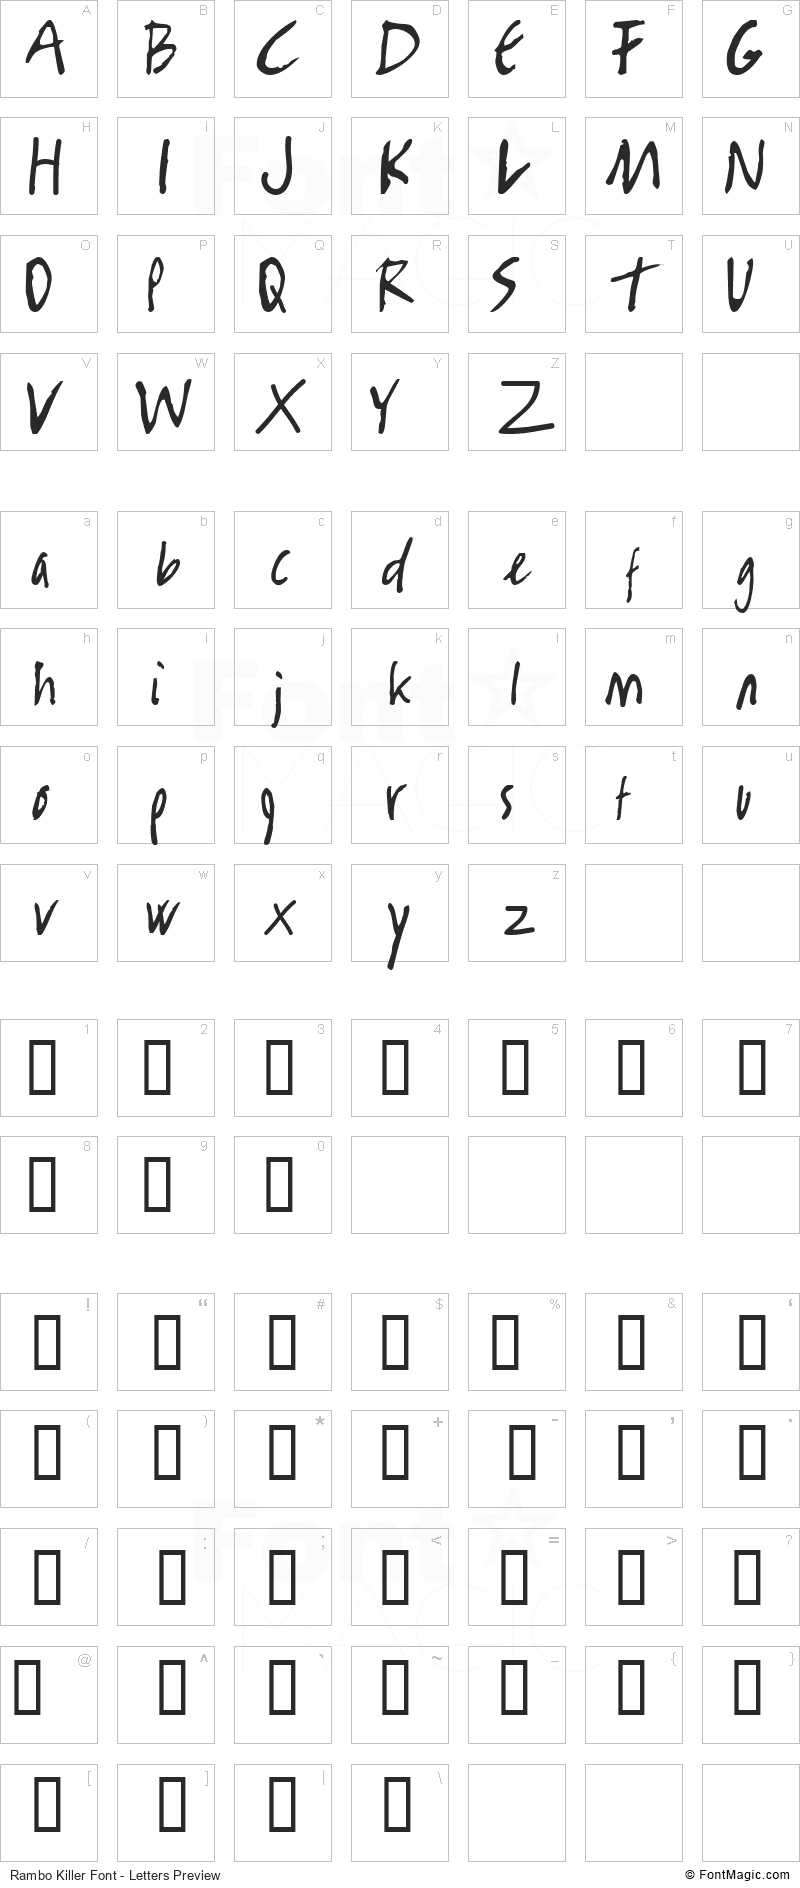 Rambo Killer Font - All Latters Preview Chart